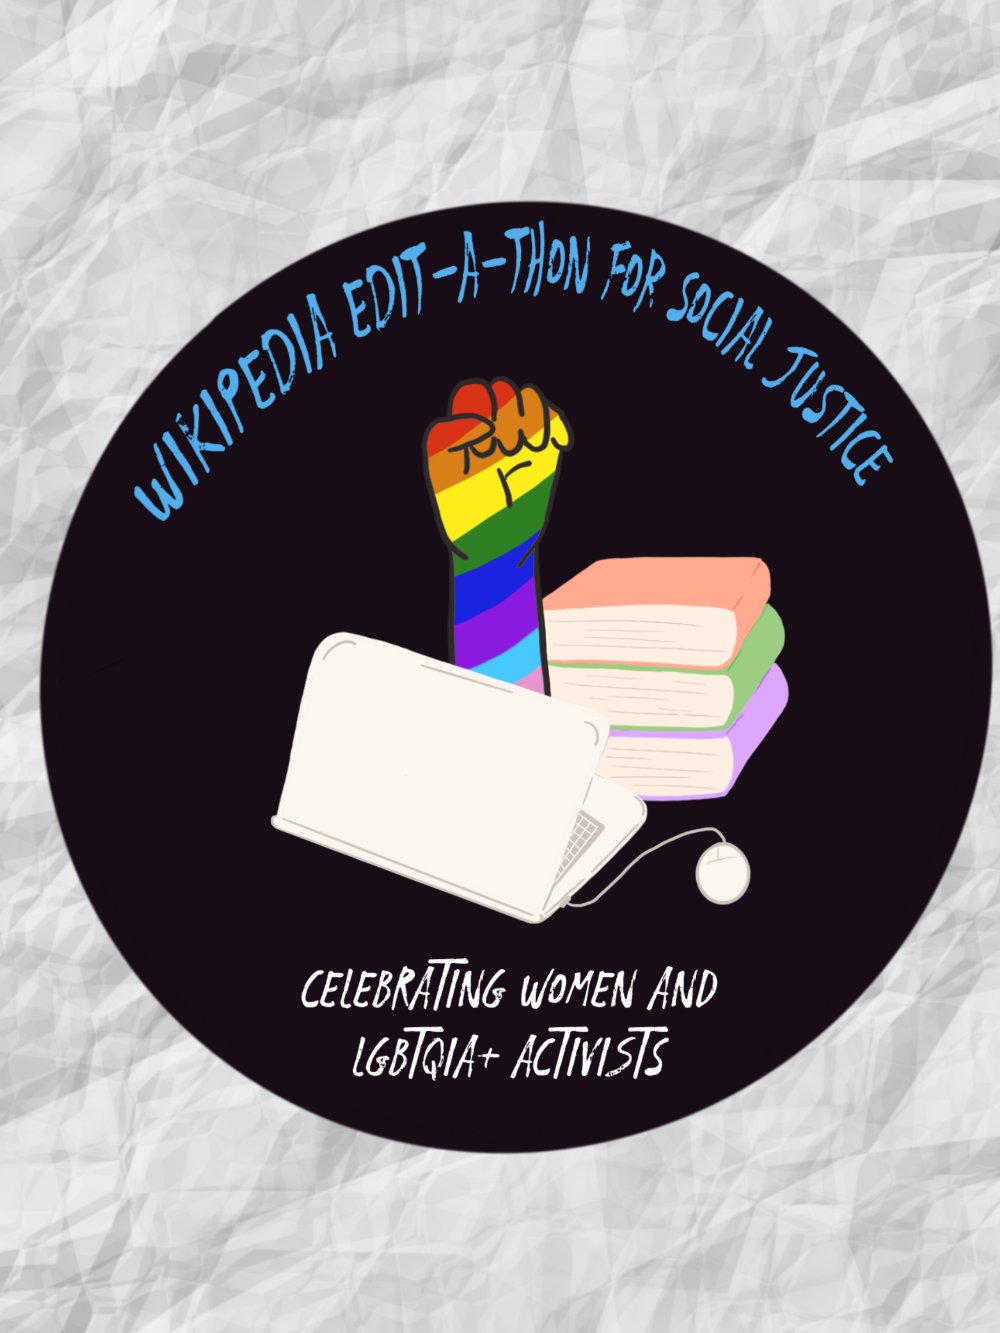 Wikipedia Edit-A-Thon for Social Justice: Celebrating Women and LGBTQIA+ Activists